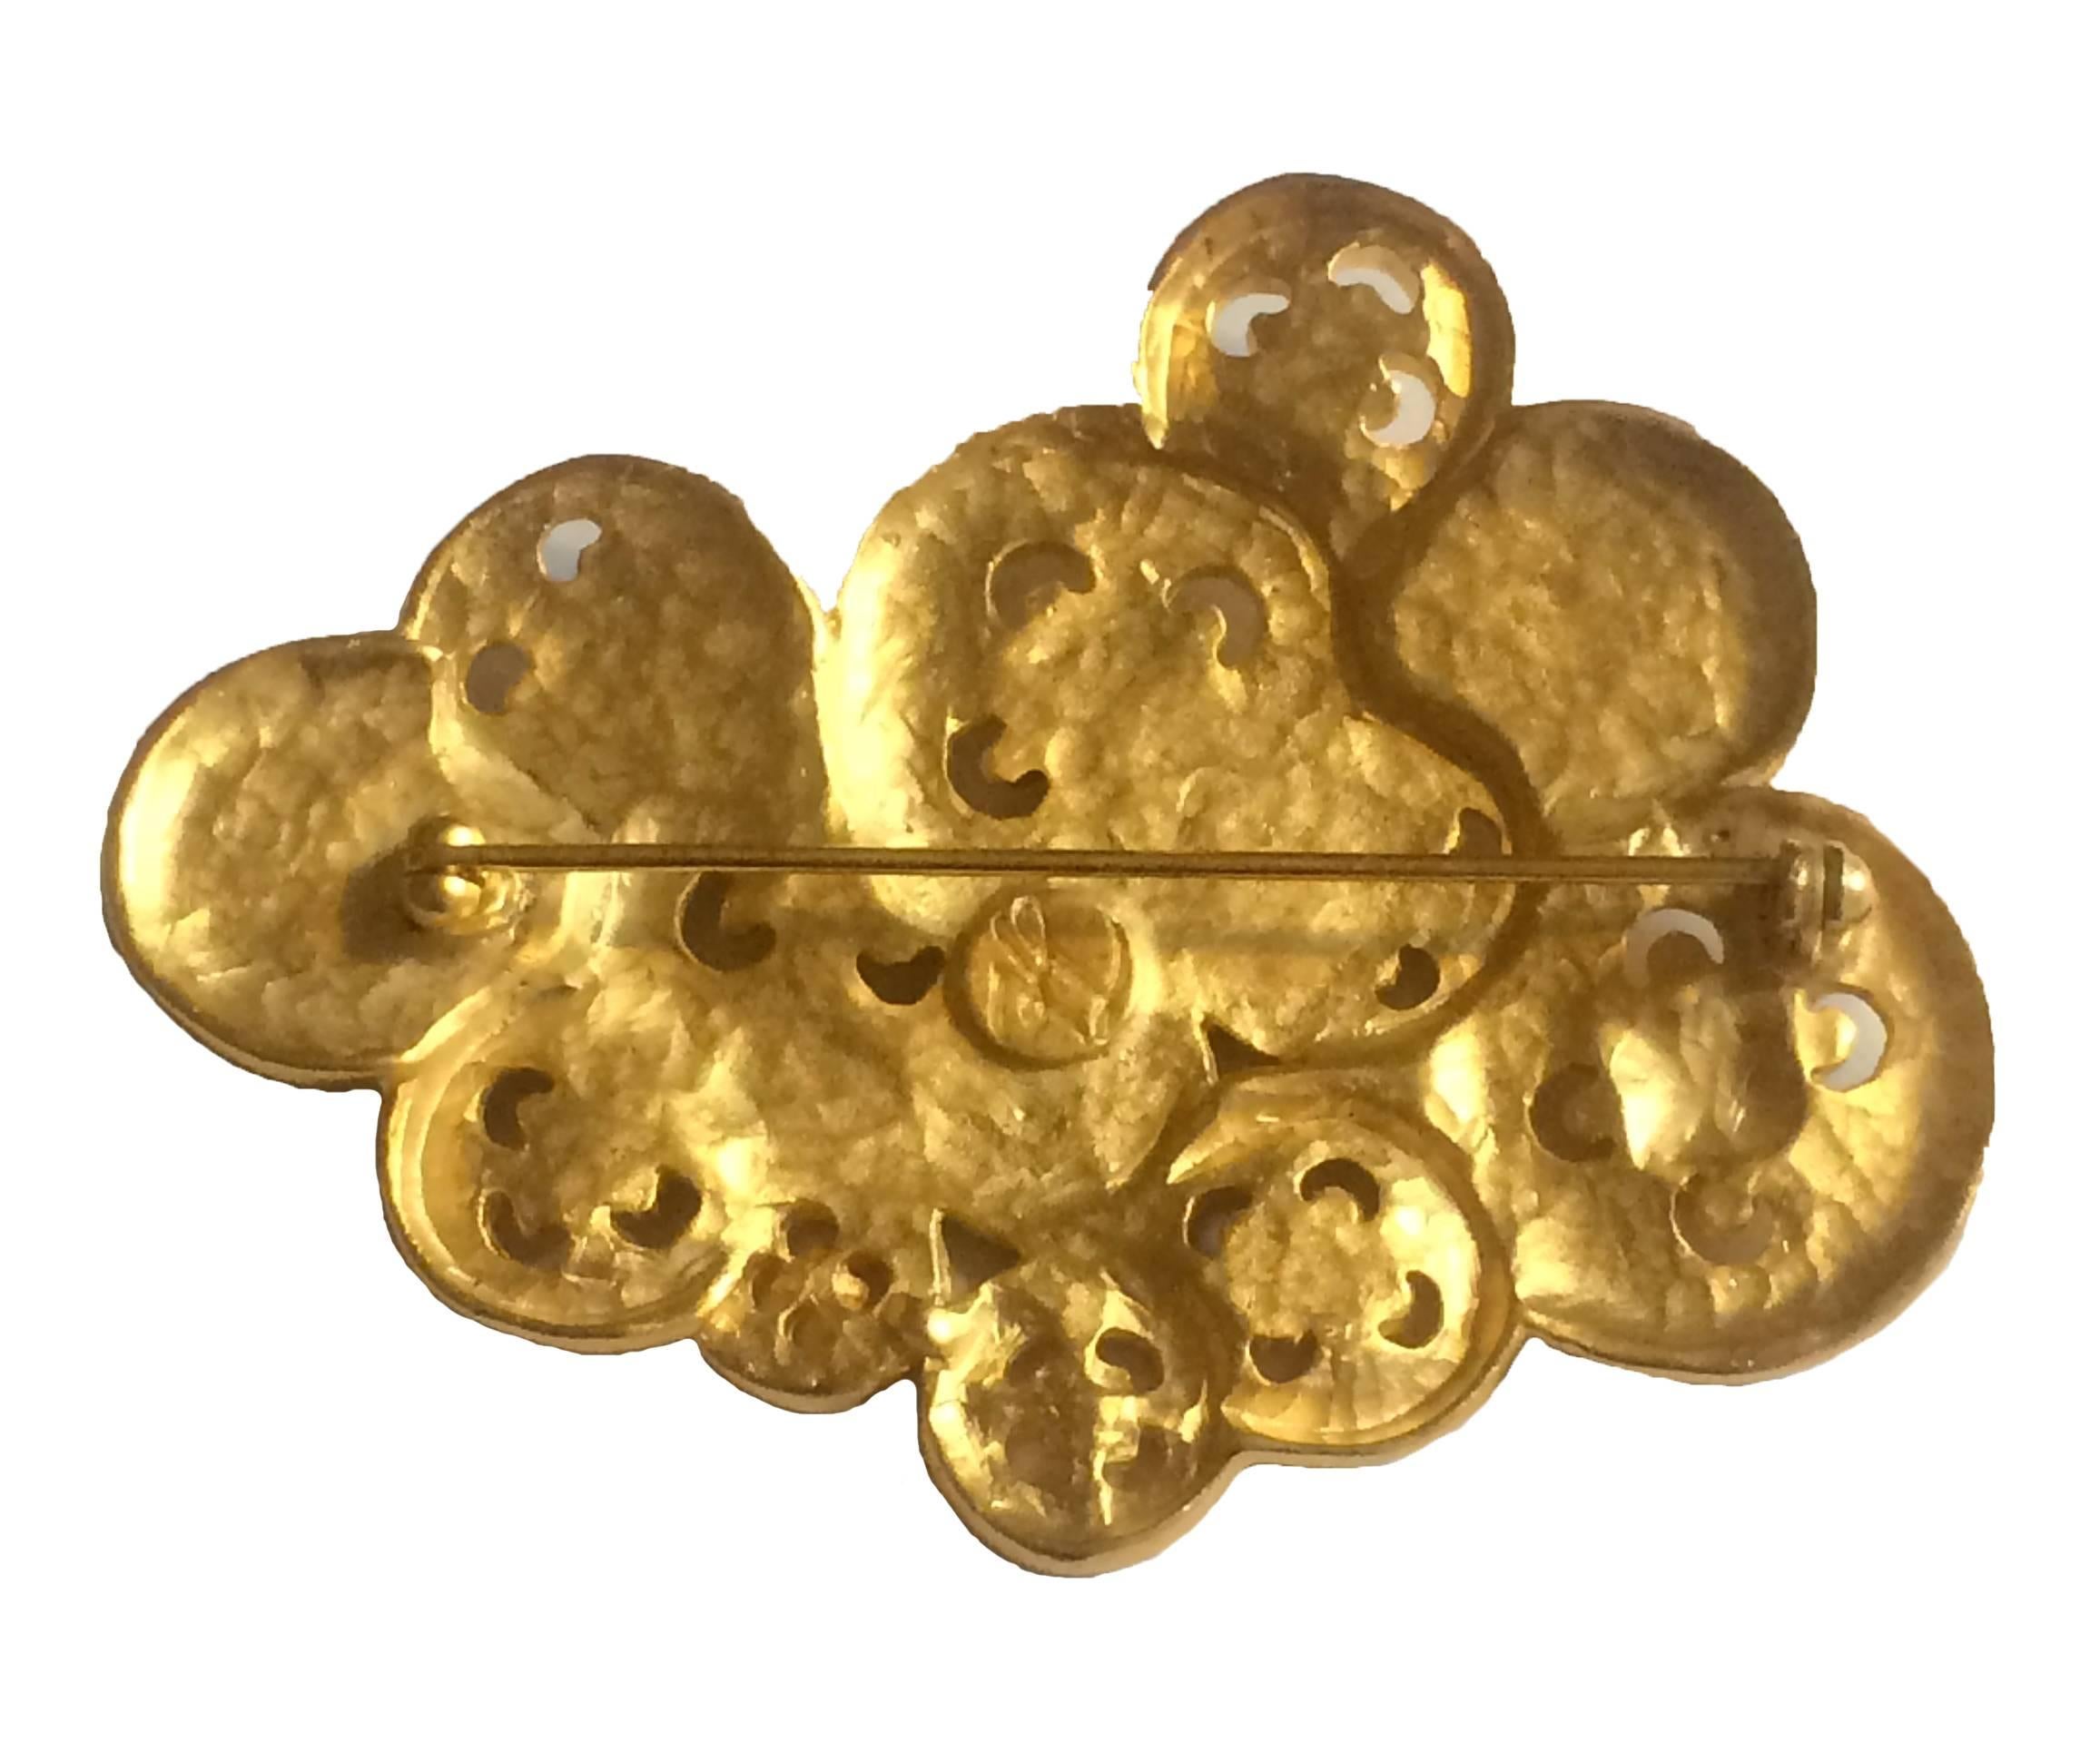 Karl Lagerfeld vintage 1990s gold tone button pin.

Approximately 3 x 2 3/4